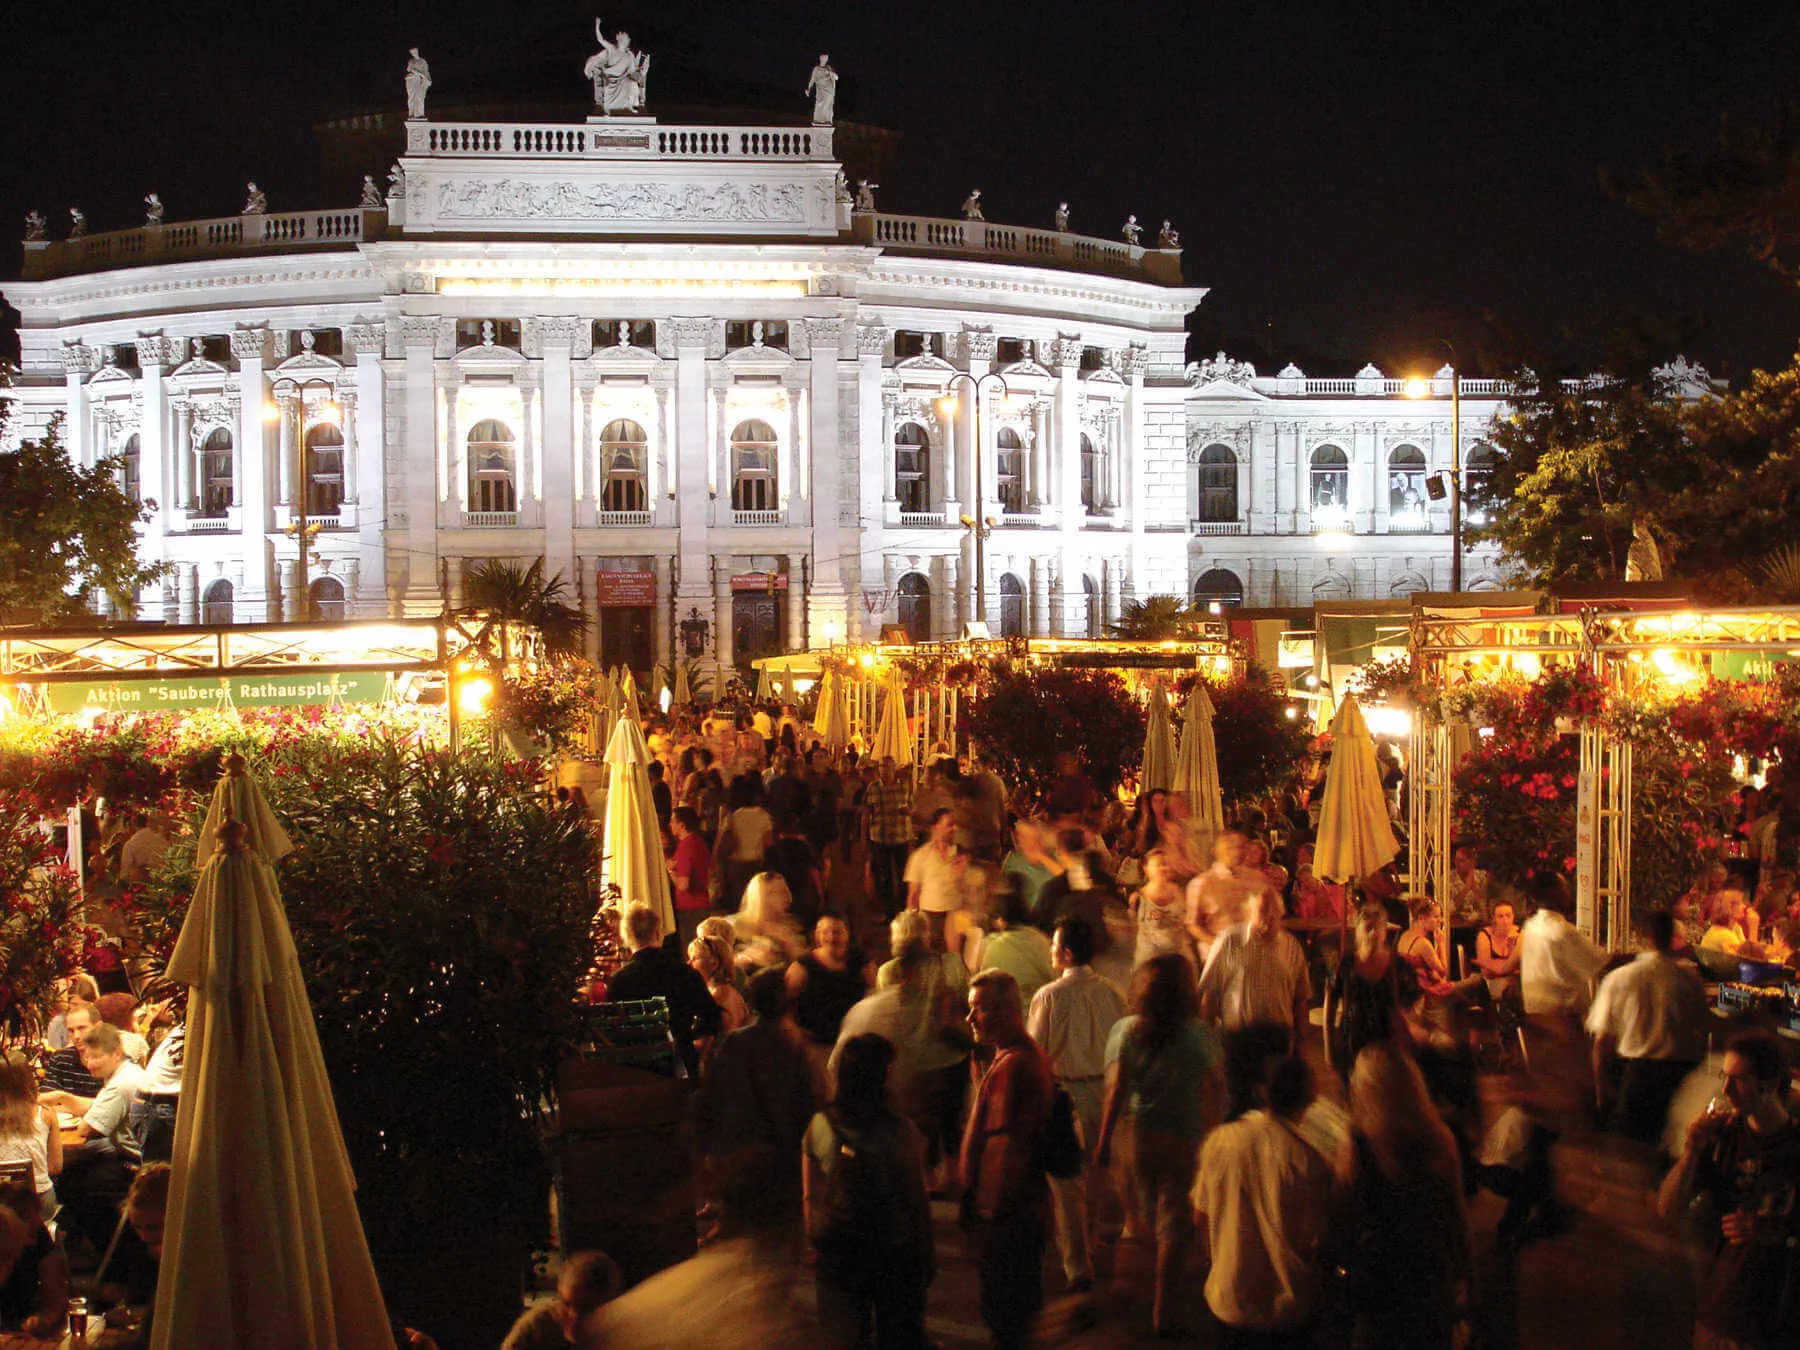 On a summer evening in Vienna, people drink, munch, and mingle before the outdoor opera begins